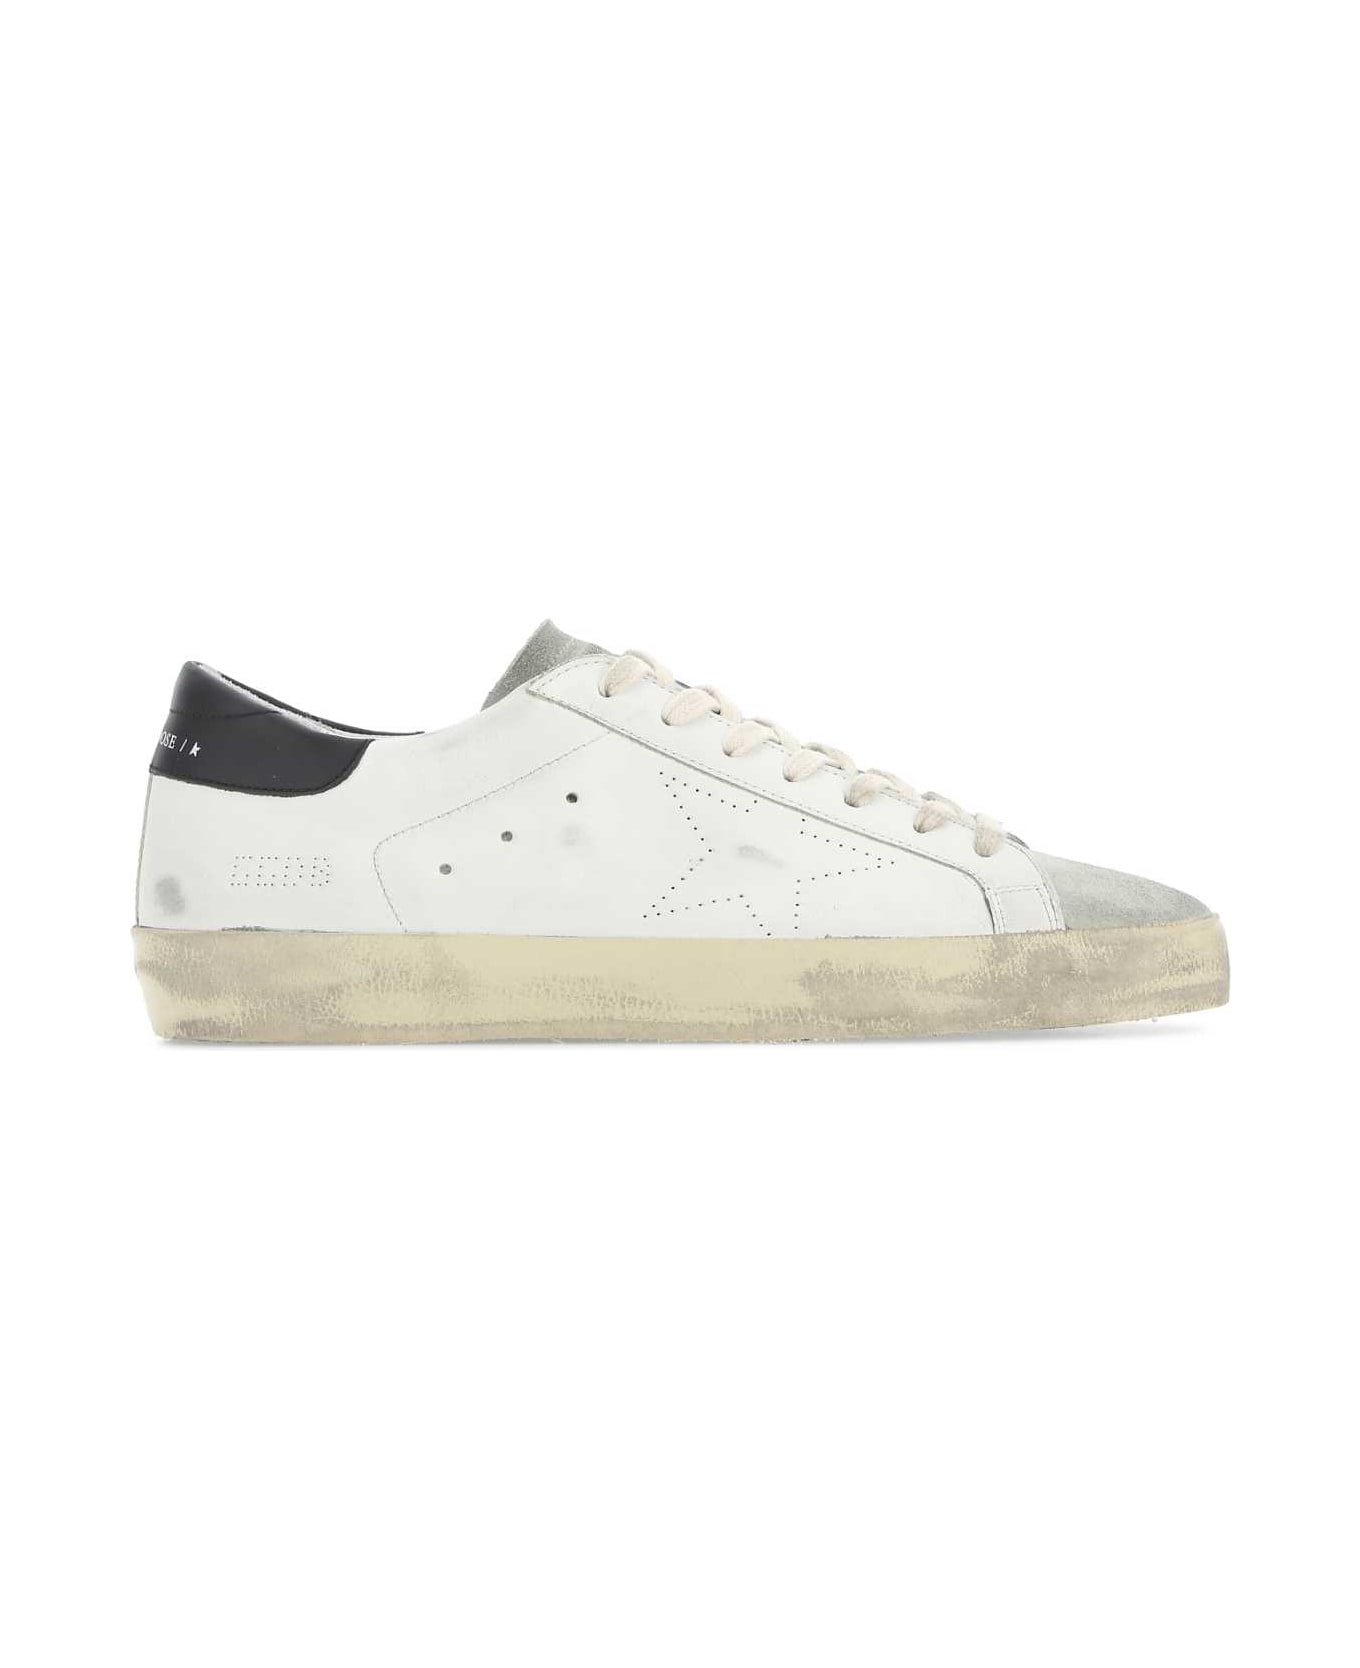 Golden Goose Two-tone Leather Superstar Skate Sneakers - 10220